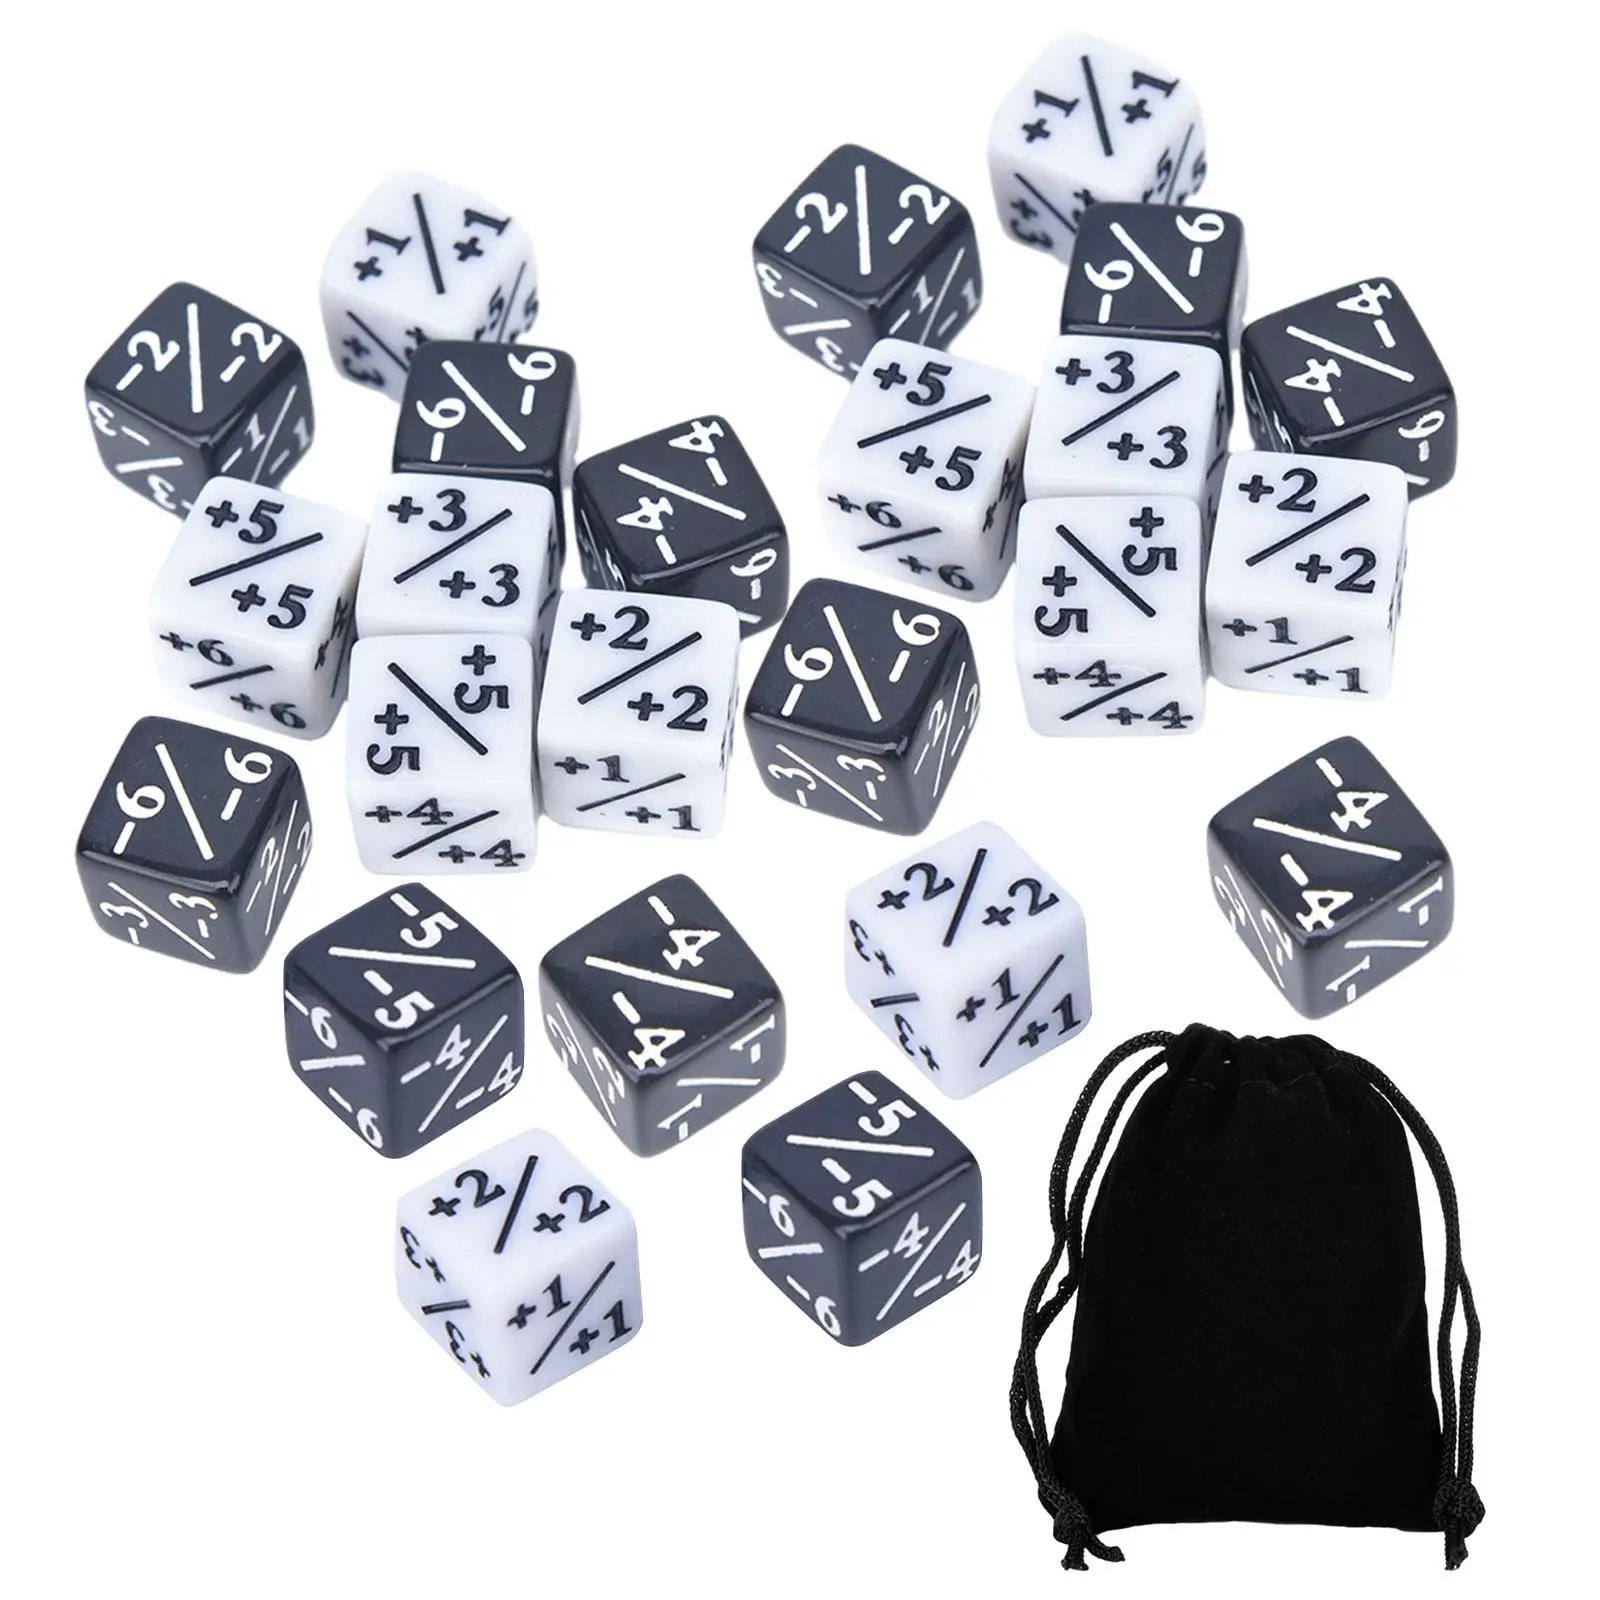 24 Pieces Counter Token Dice D6 for Party Favors Teaching Props Math Game